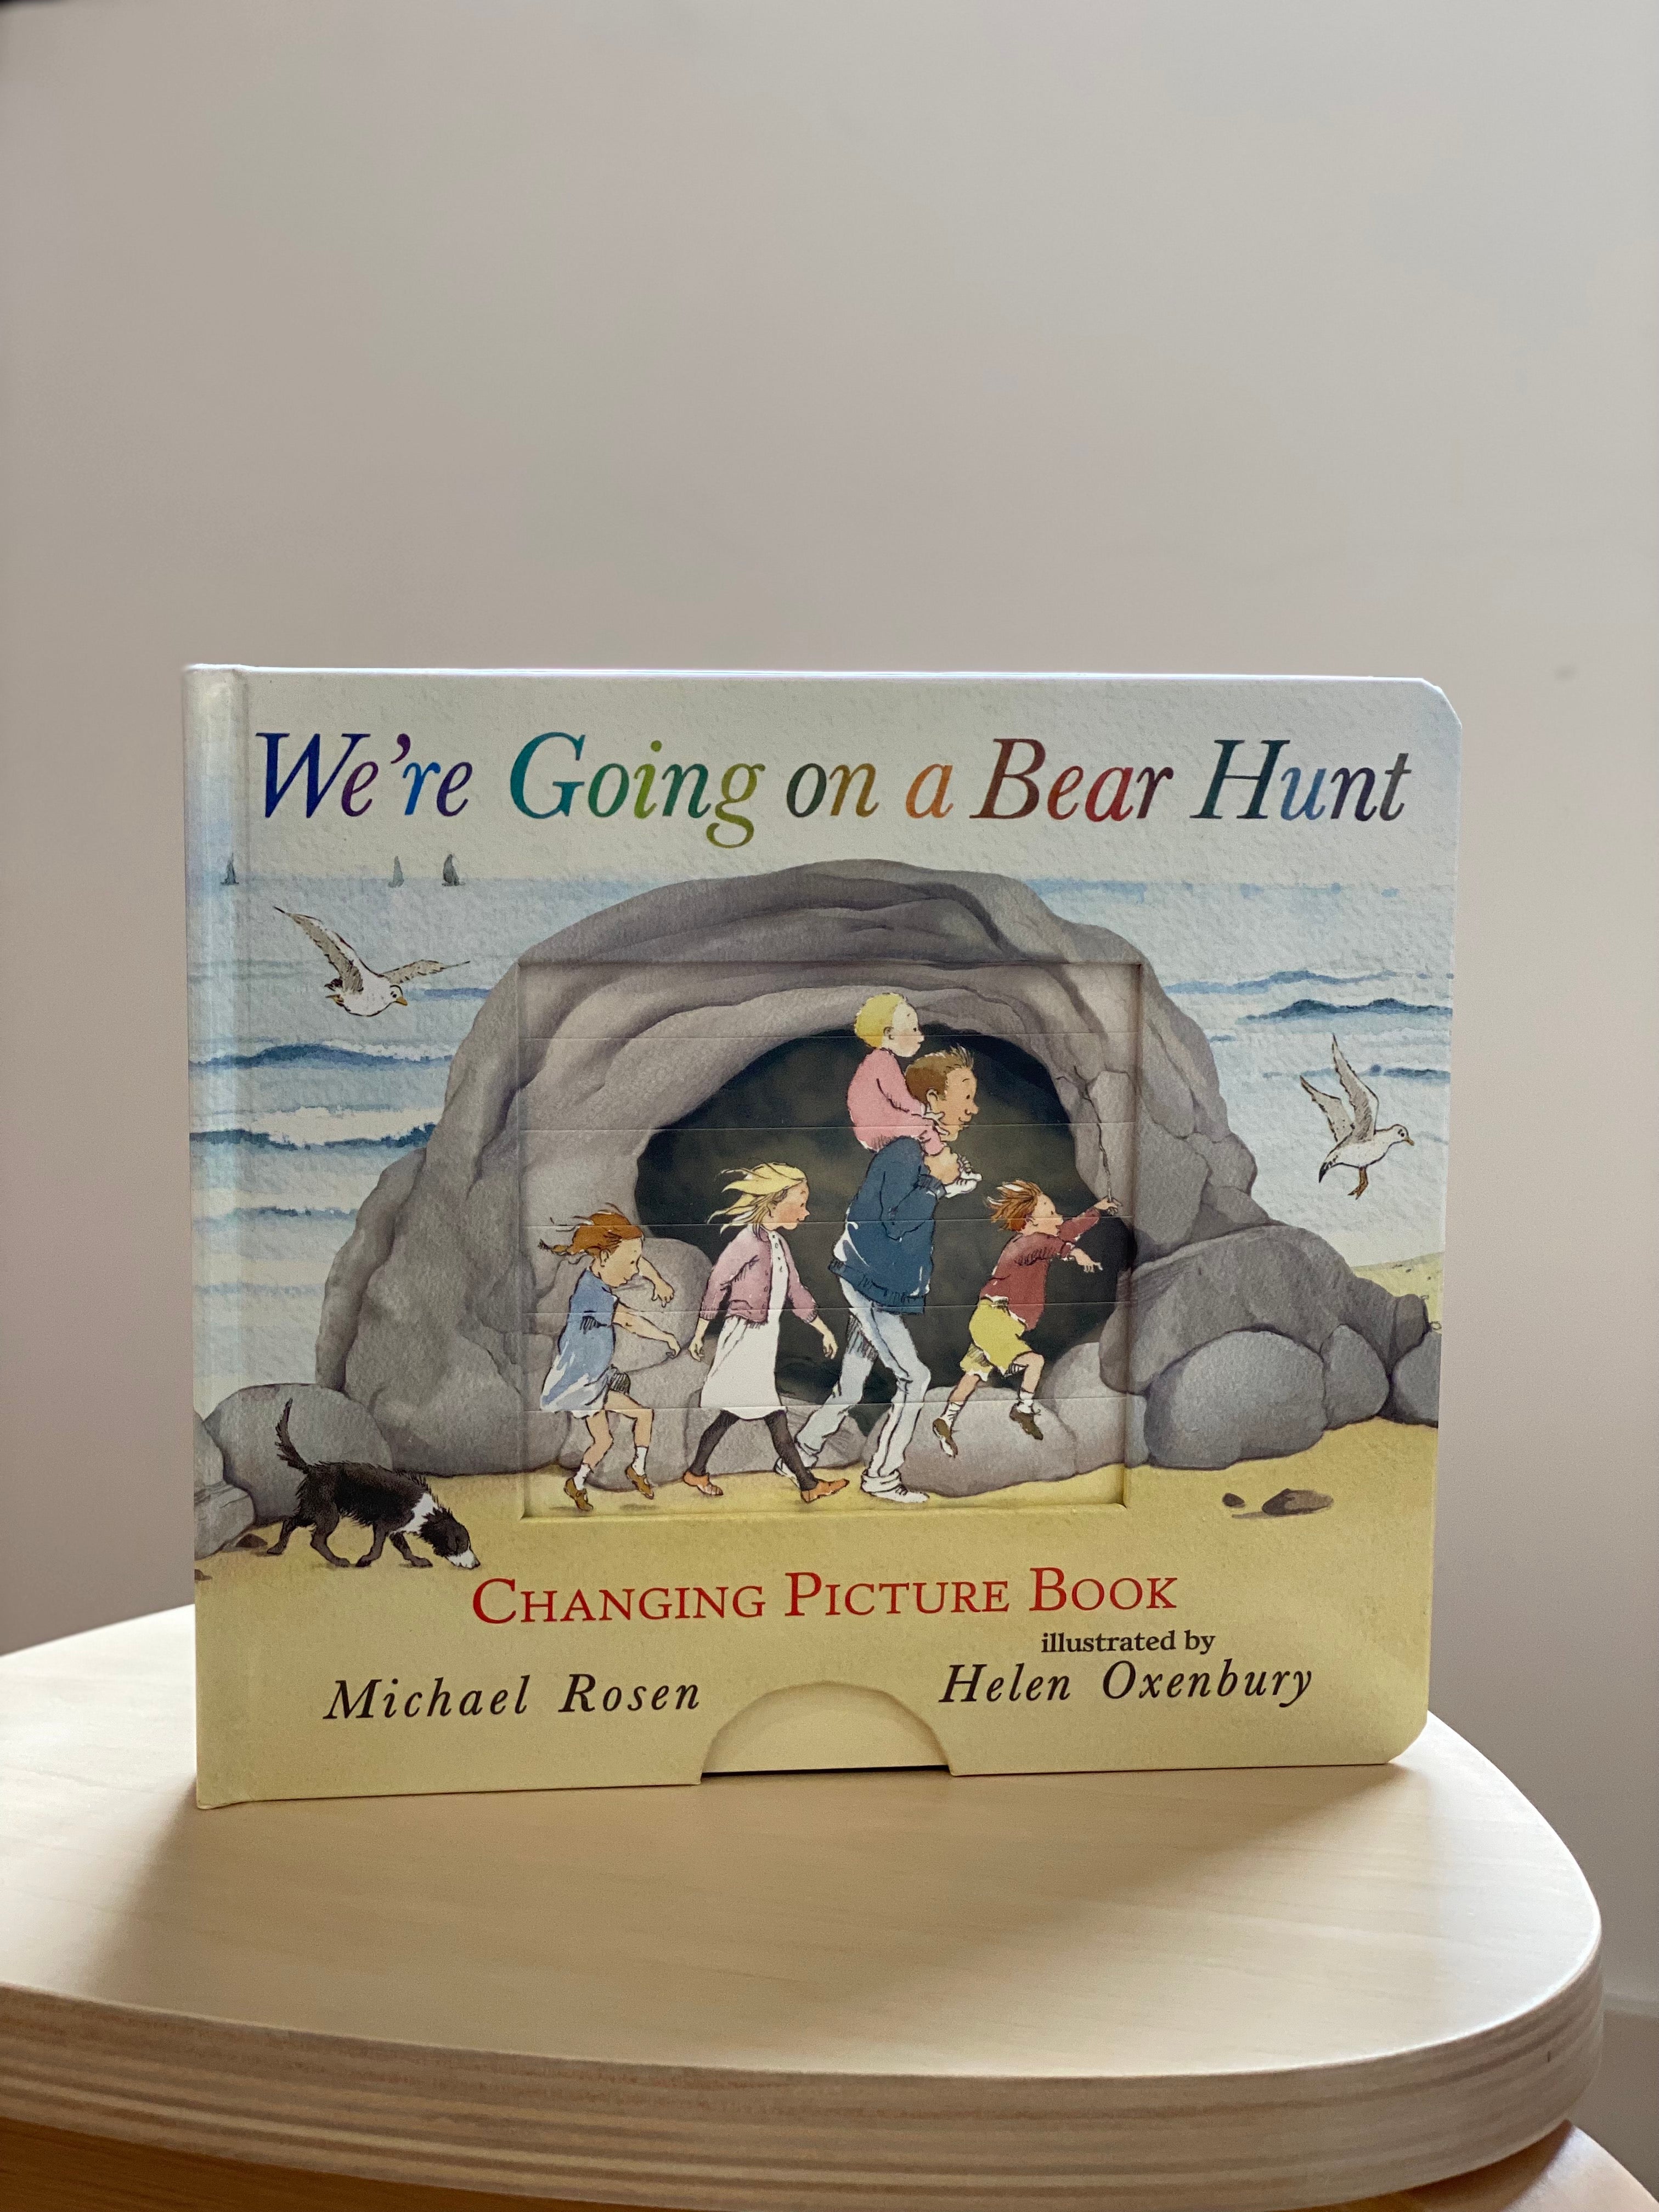 We're Going on a Bear Hunt Changing Picture Book